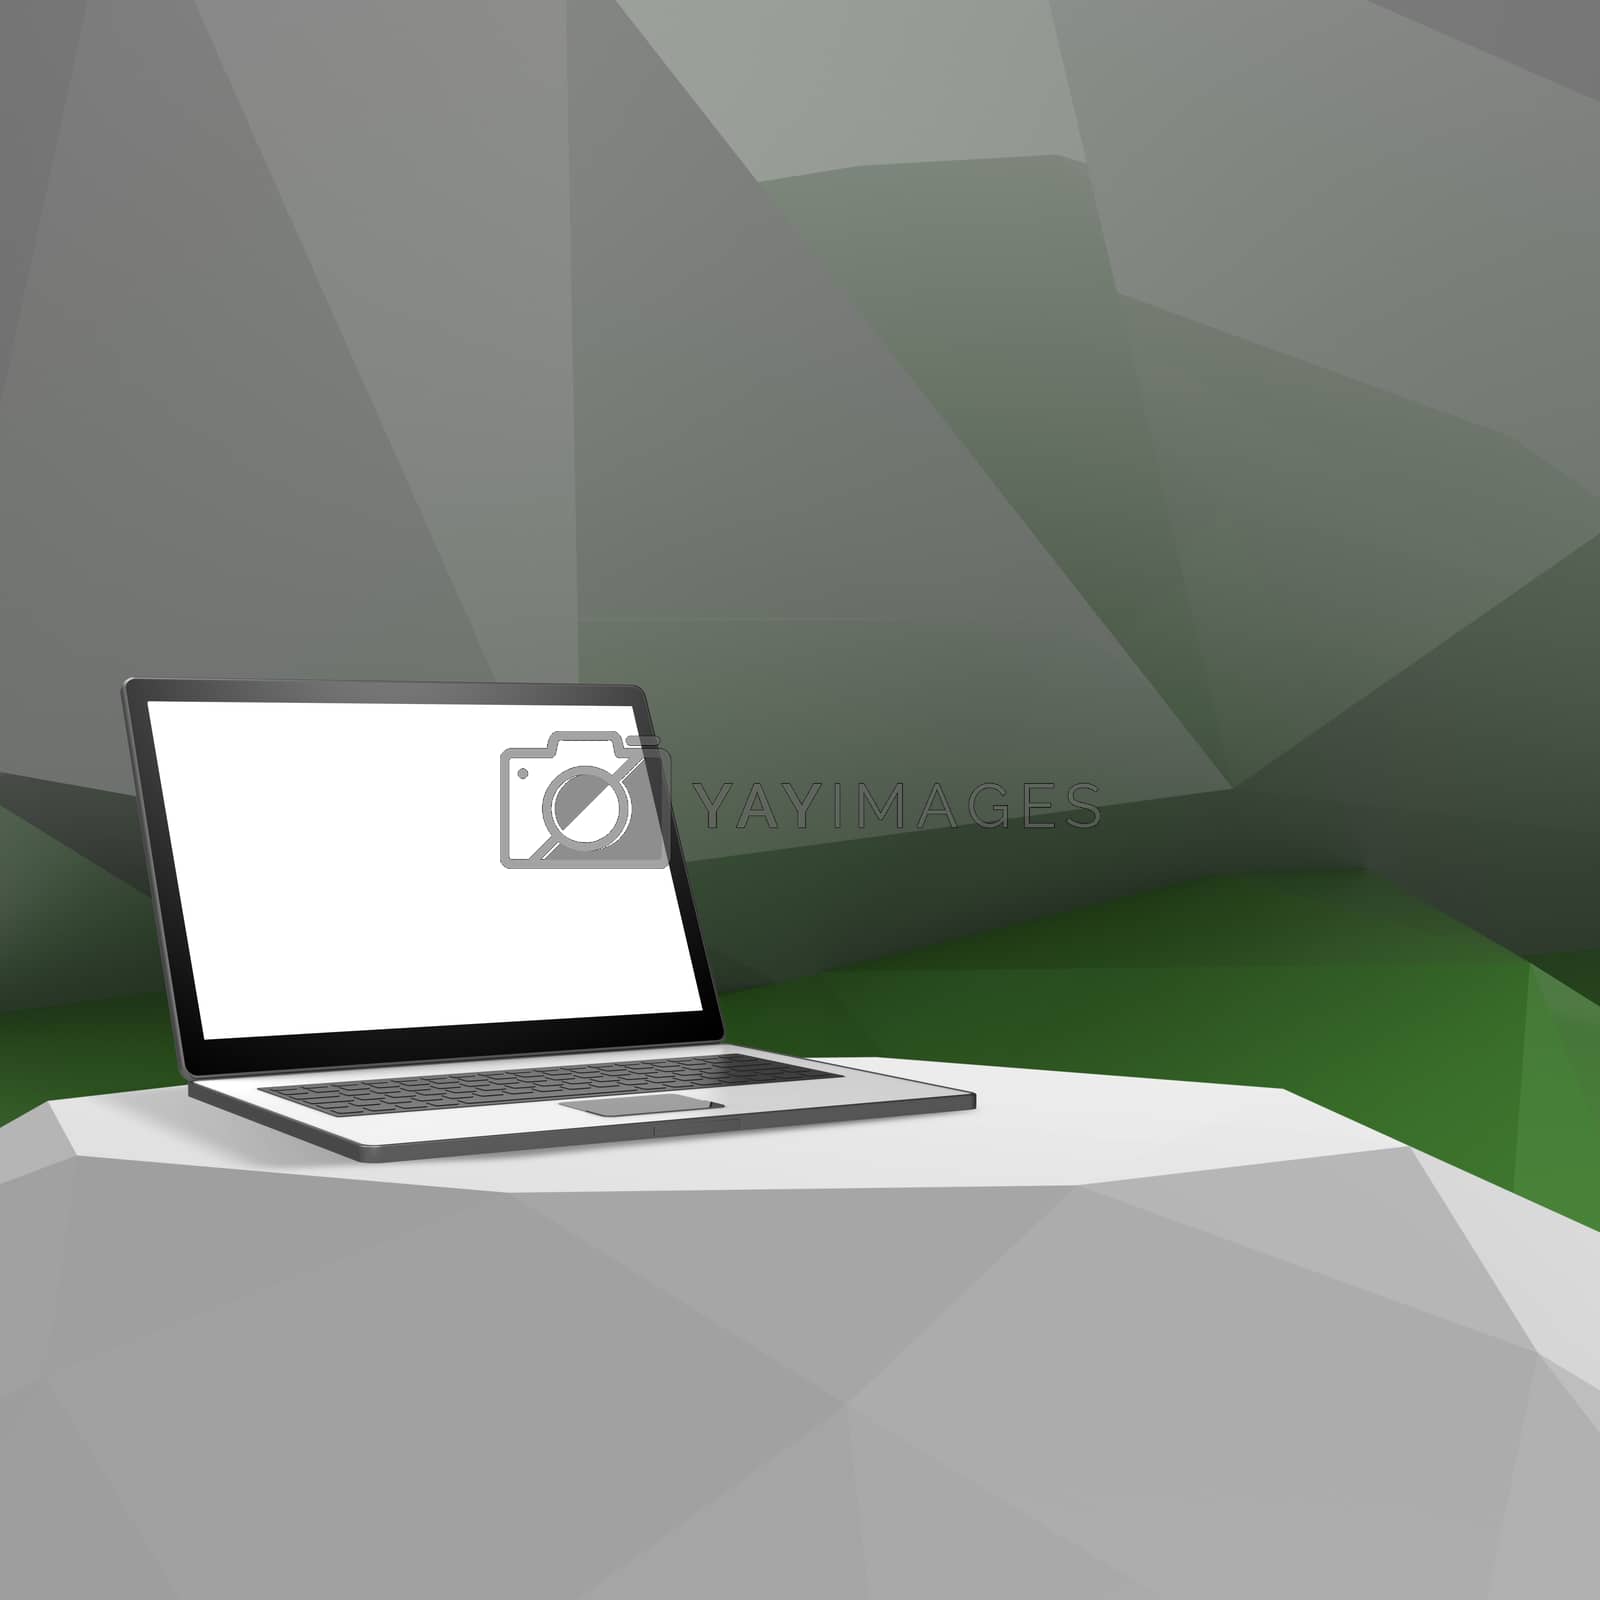 Royalty free image of Laptop with blank screen on laminate table and low poly geometri by everythingpossible